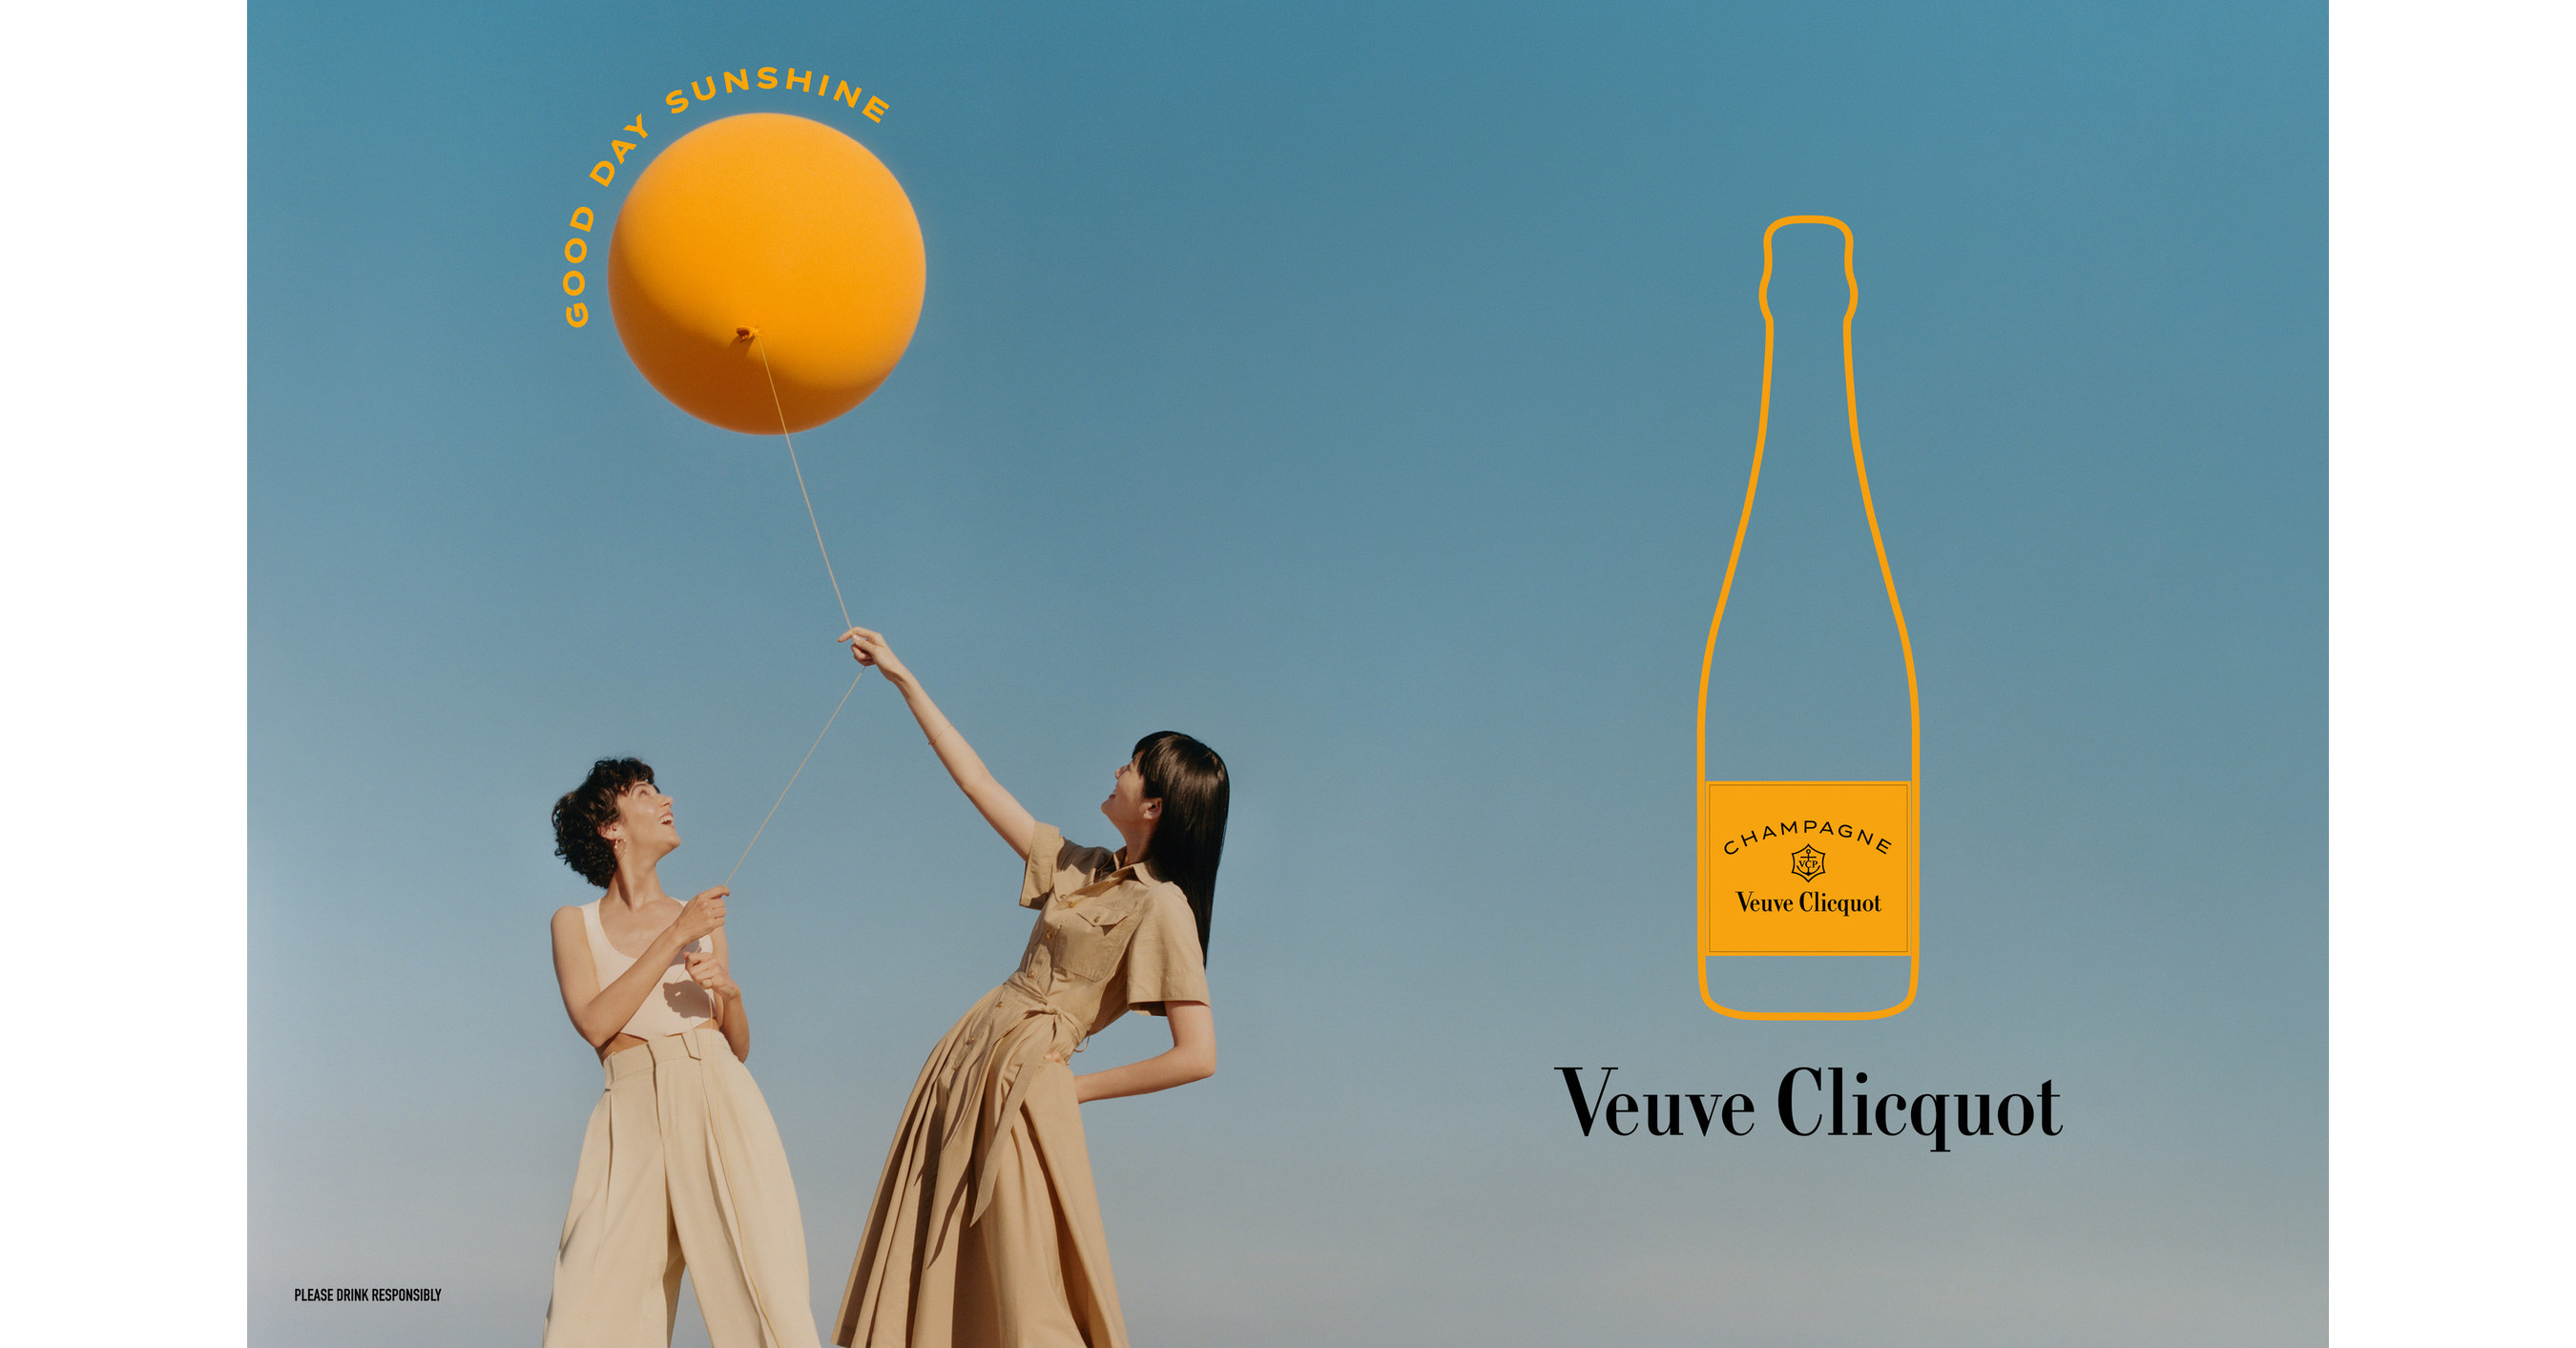 VEUVE CLICQUOT CELEBRATES 250 YEARS OF SOLAIRE WITH GLOBAL LAUNCH